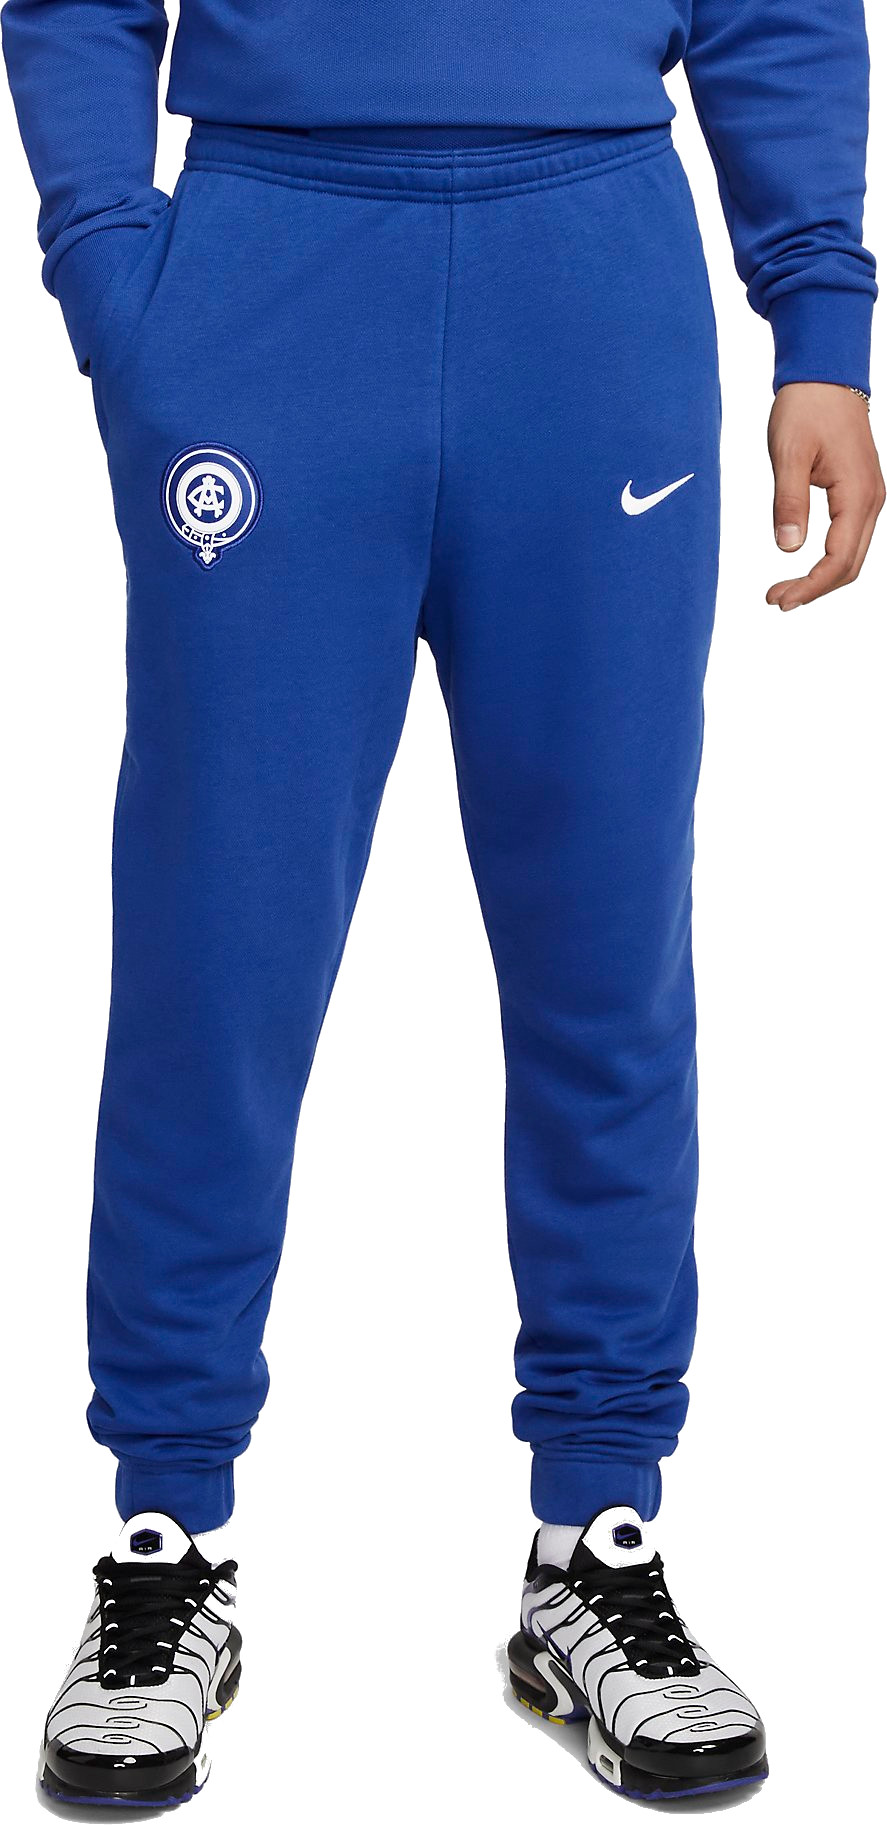 Nohavice Nike Men's French Terry Pants Atlético Madrid